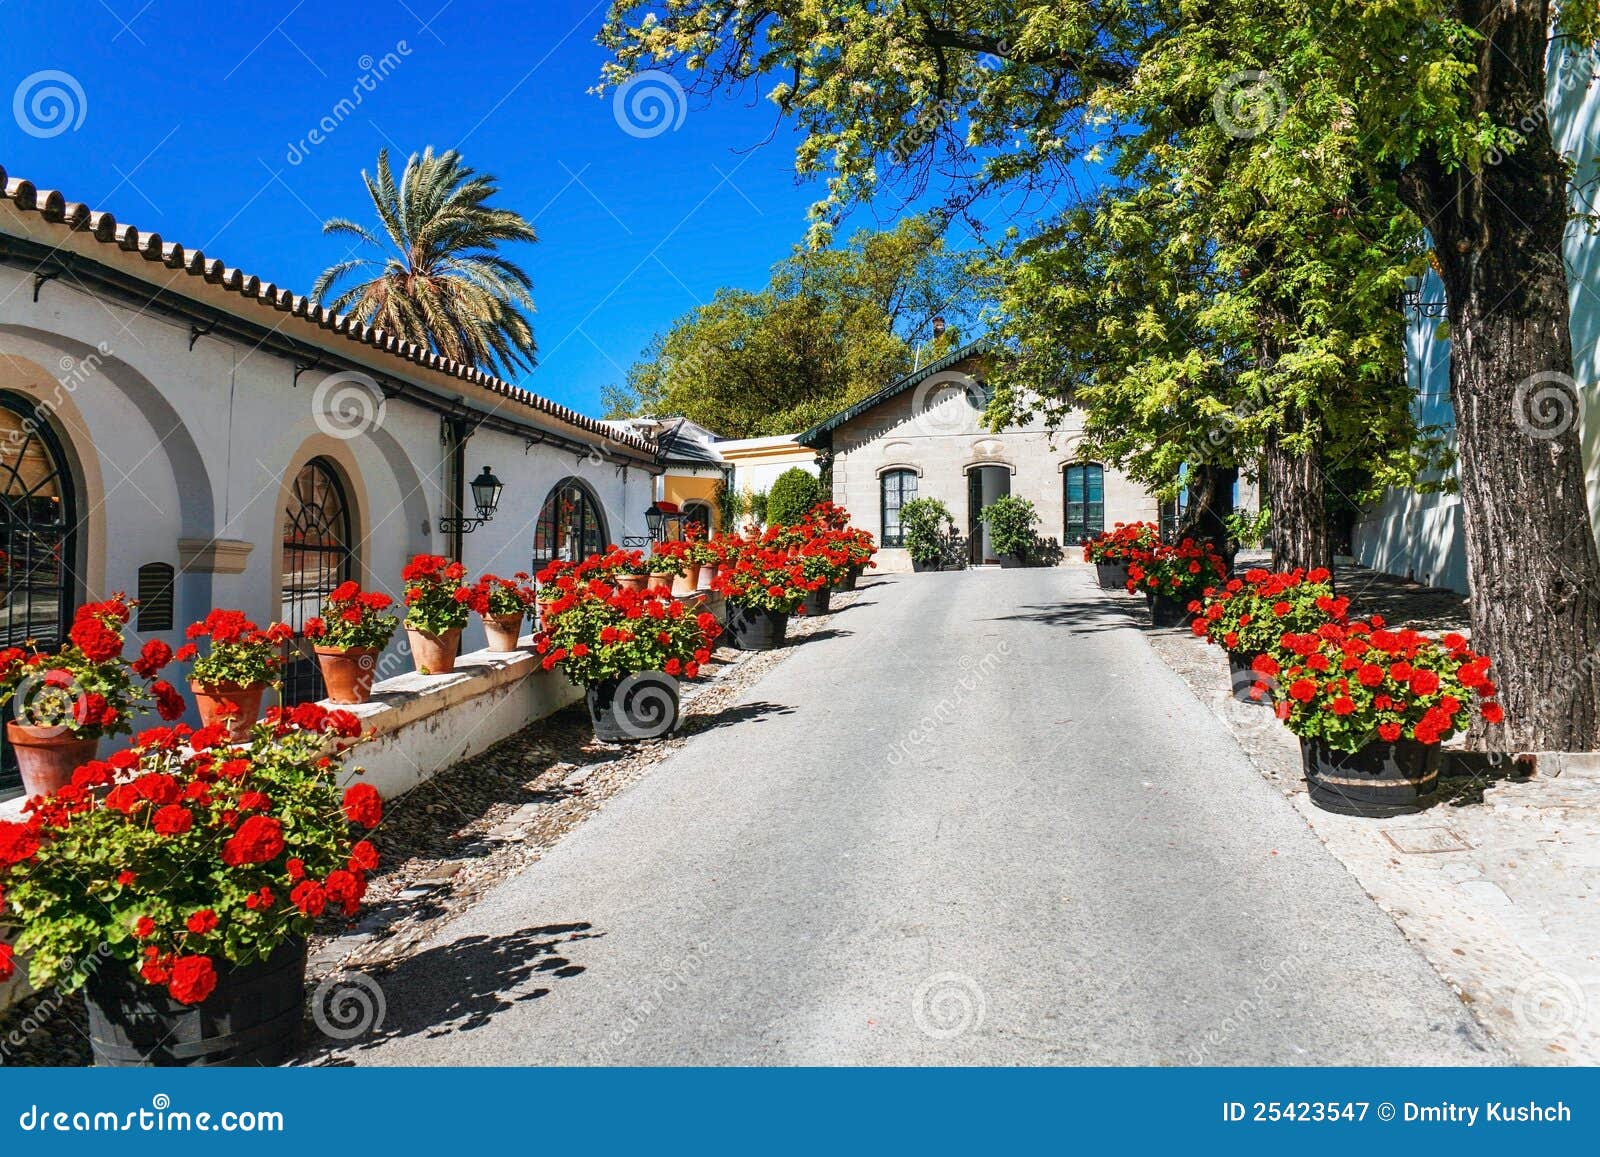 Street of Old Spanish Town. Stock Image - Image of monument, culture ...